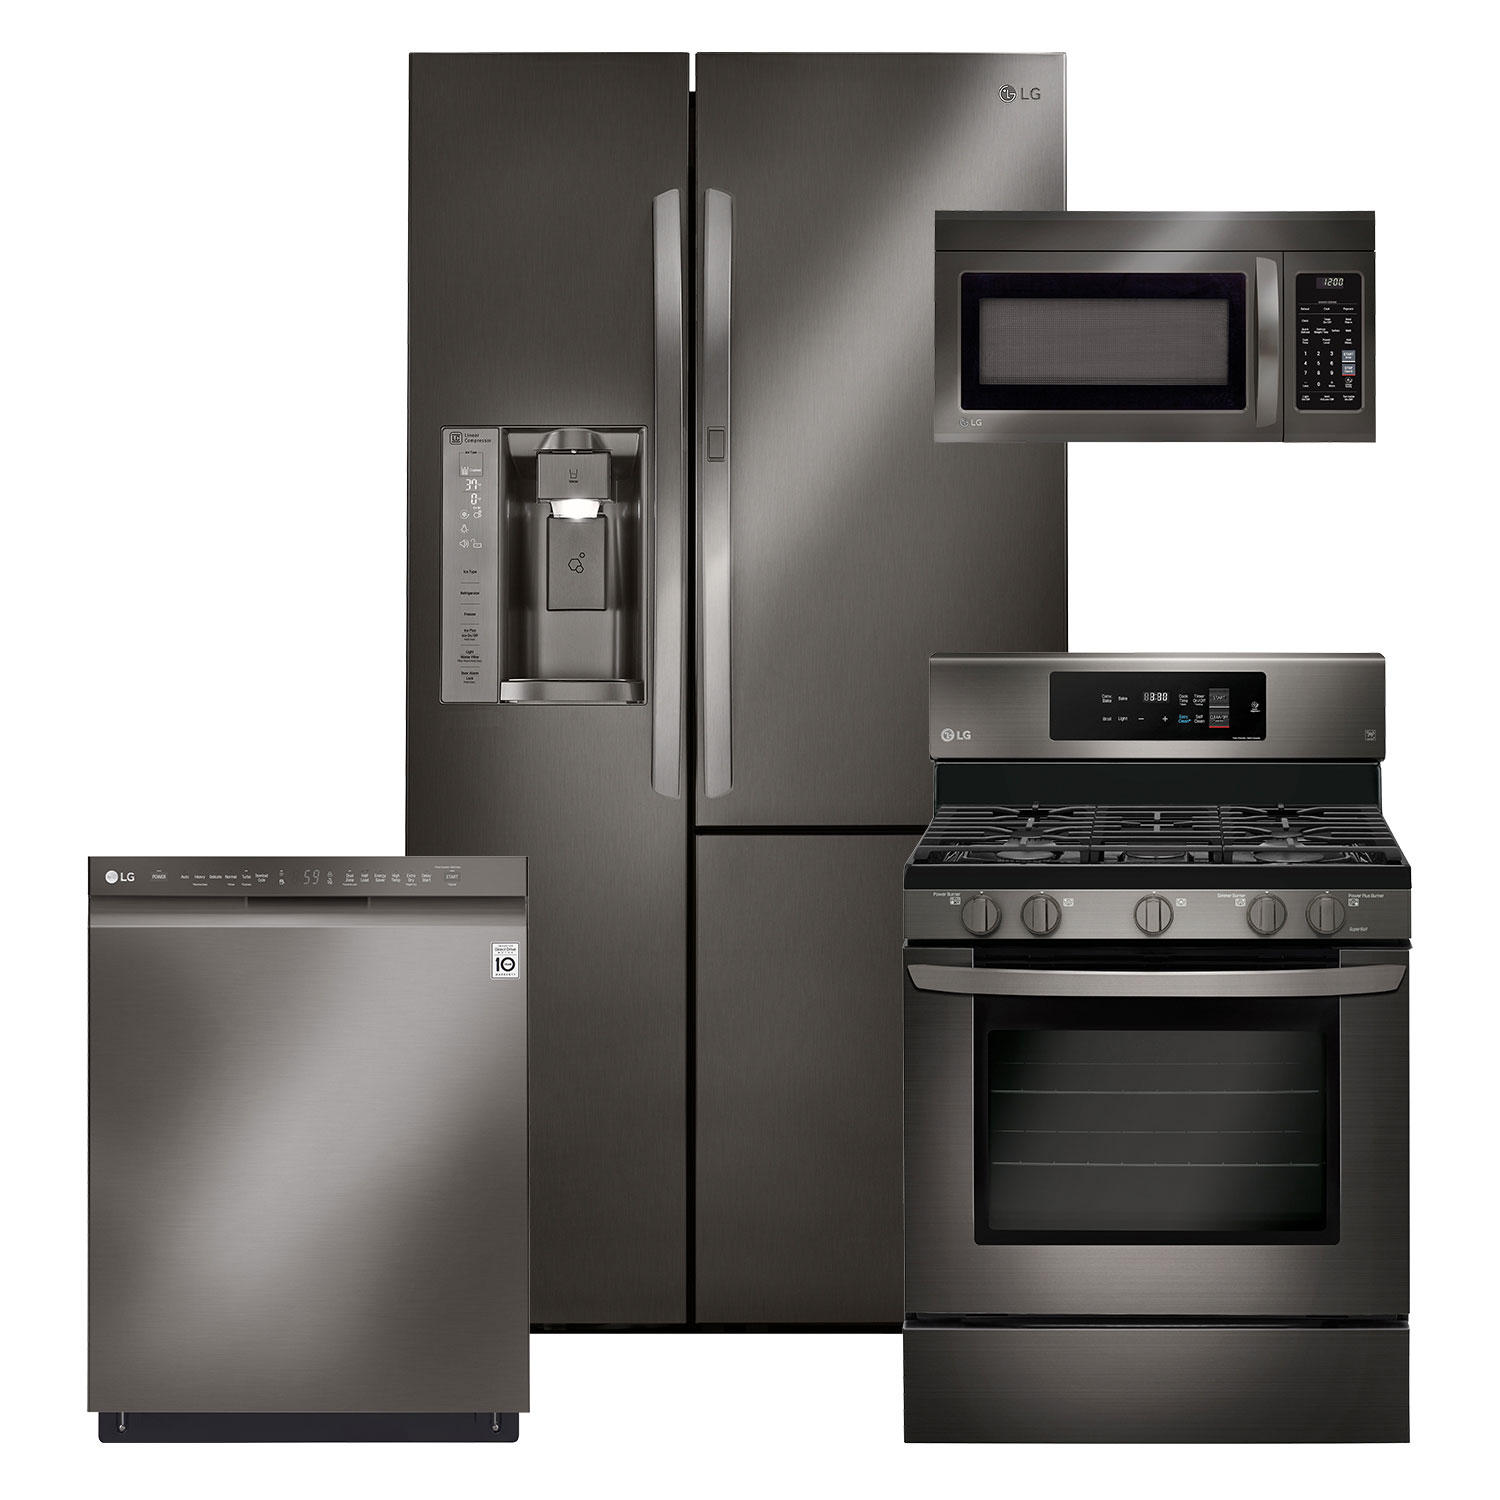 LG 4 Piece Kitchen Suite Set with 26 cu.ft Side-by-Side Refrigerator, GAS Convection Range, Microwave and Dishwasher